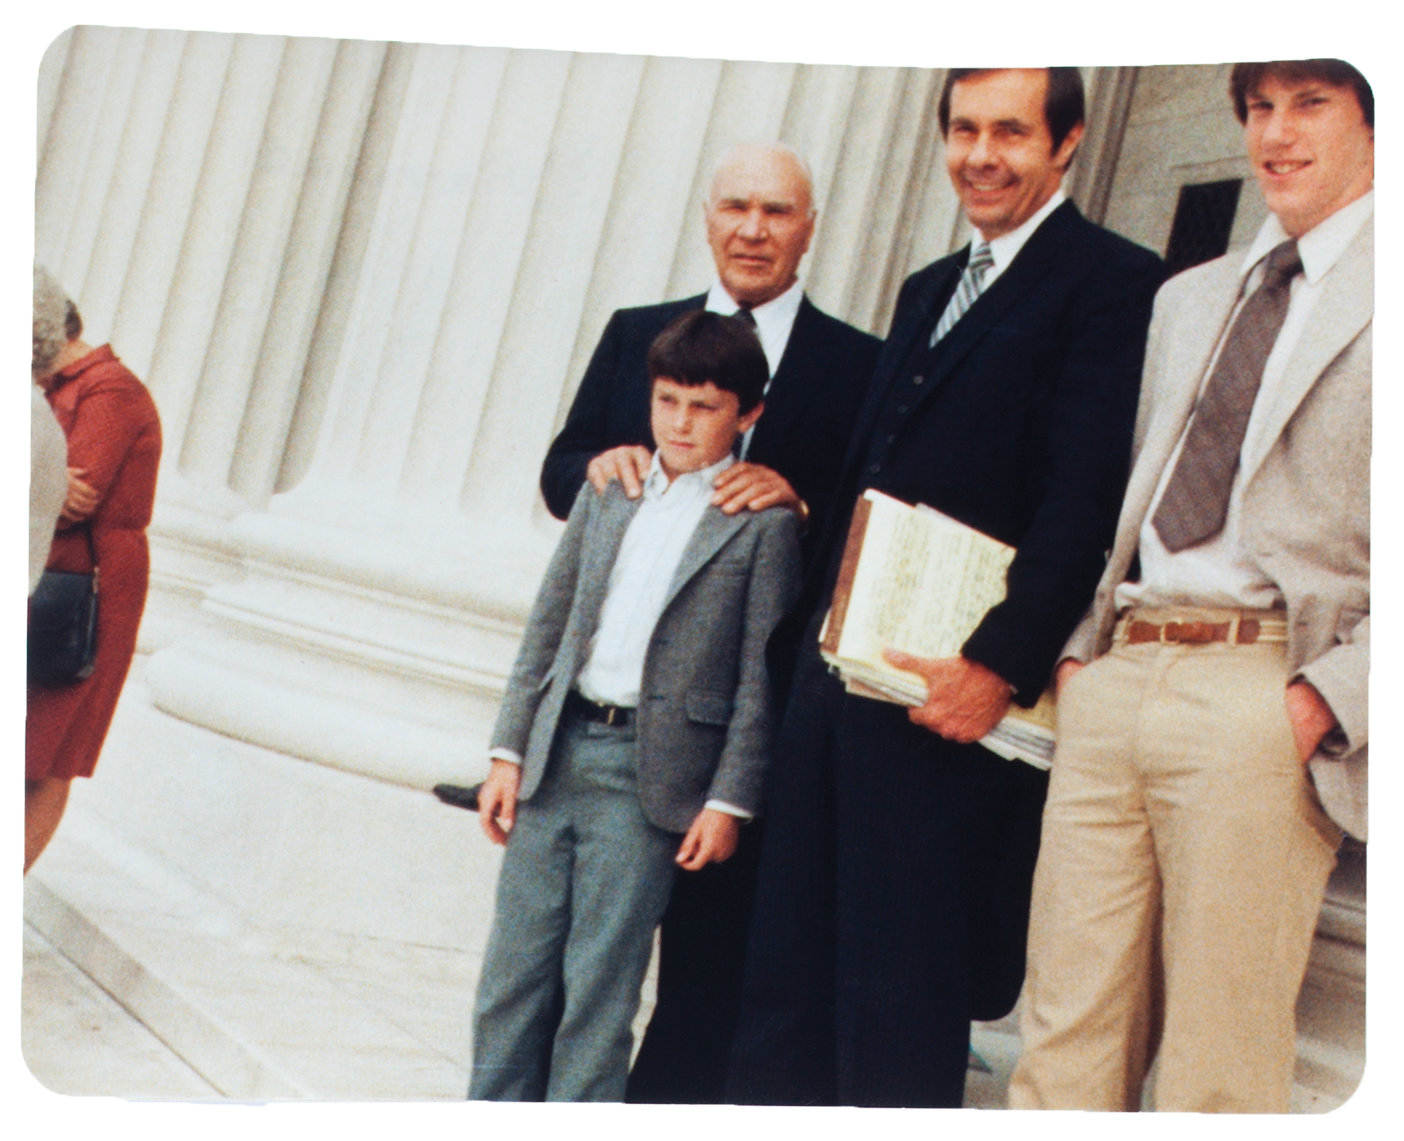 Tom, Mike, and Rex Lee with the children's grandfather Wilford Shumway on the steps of the U.S. Supreme Court